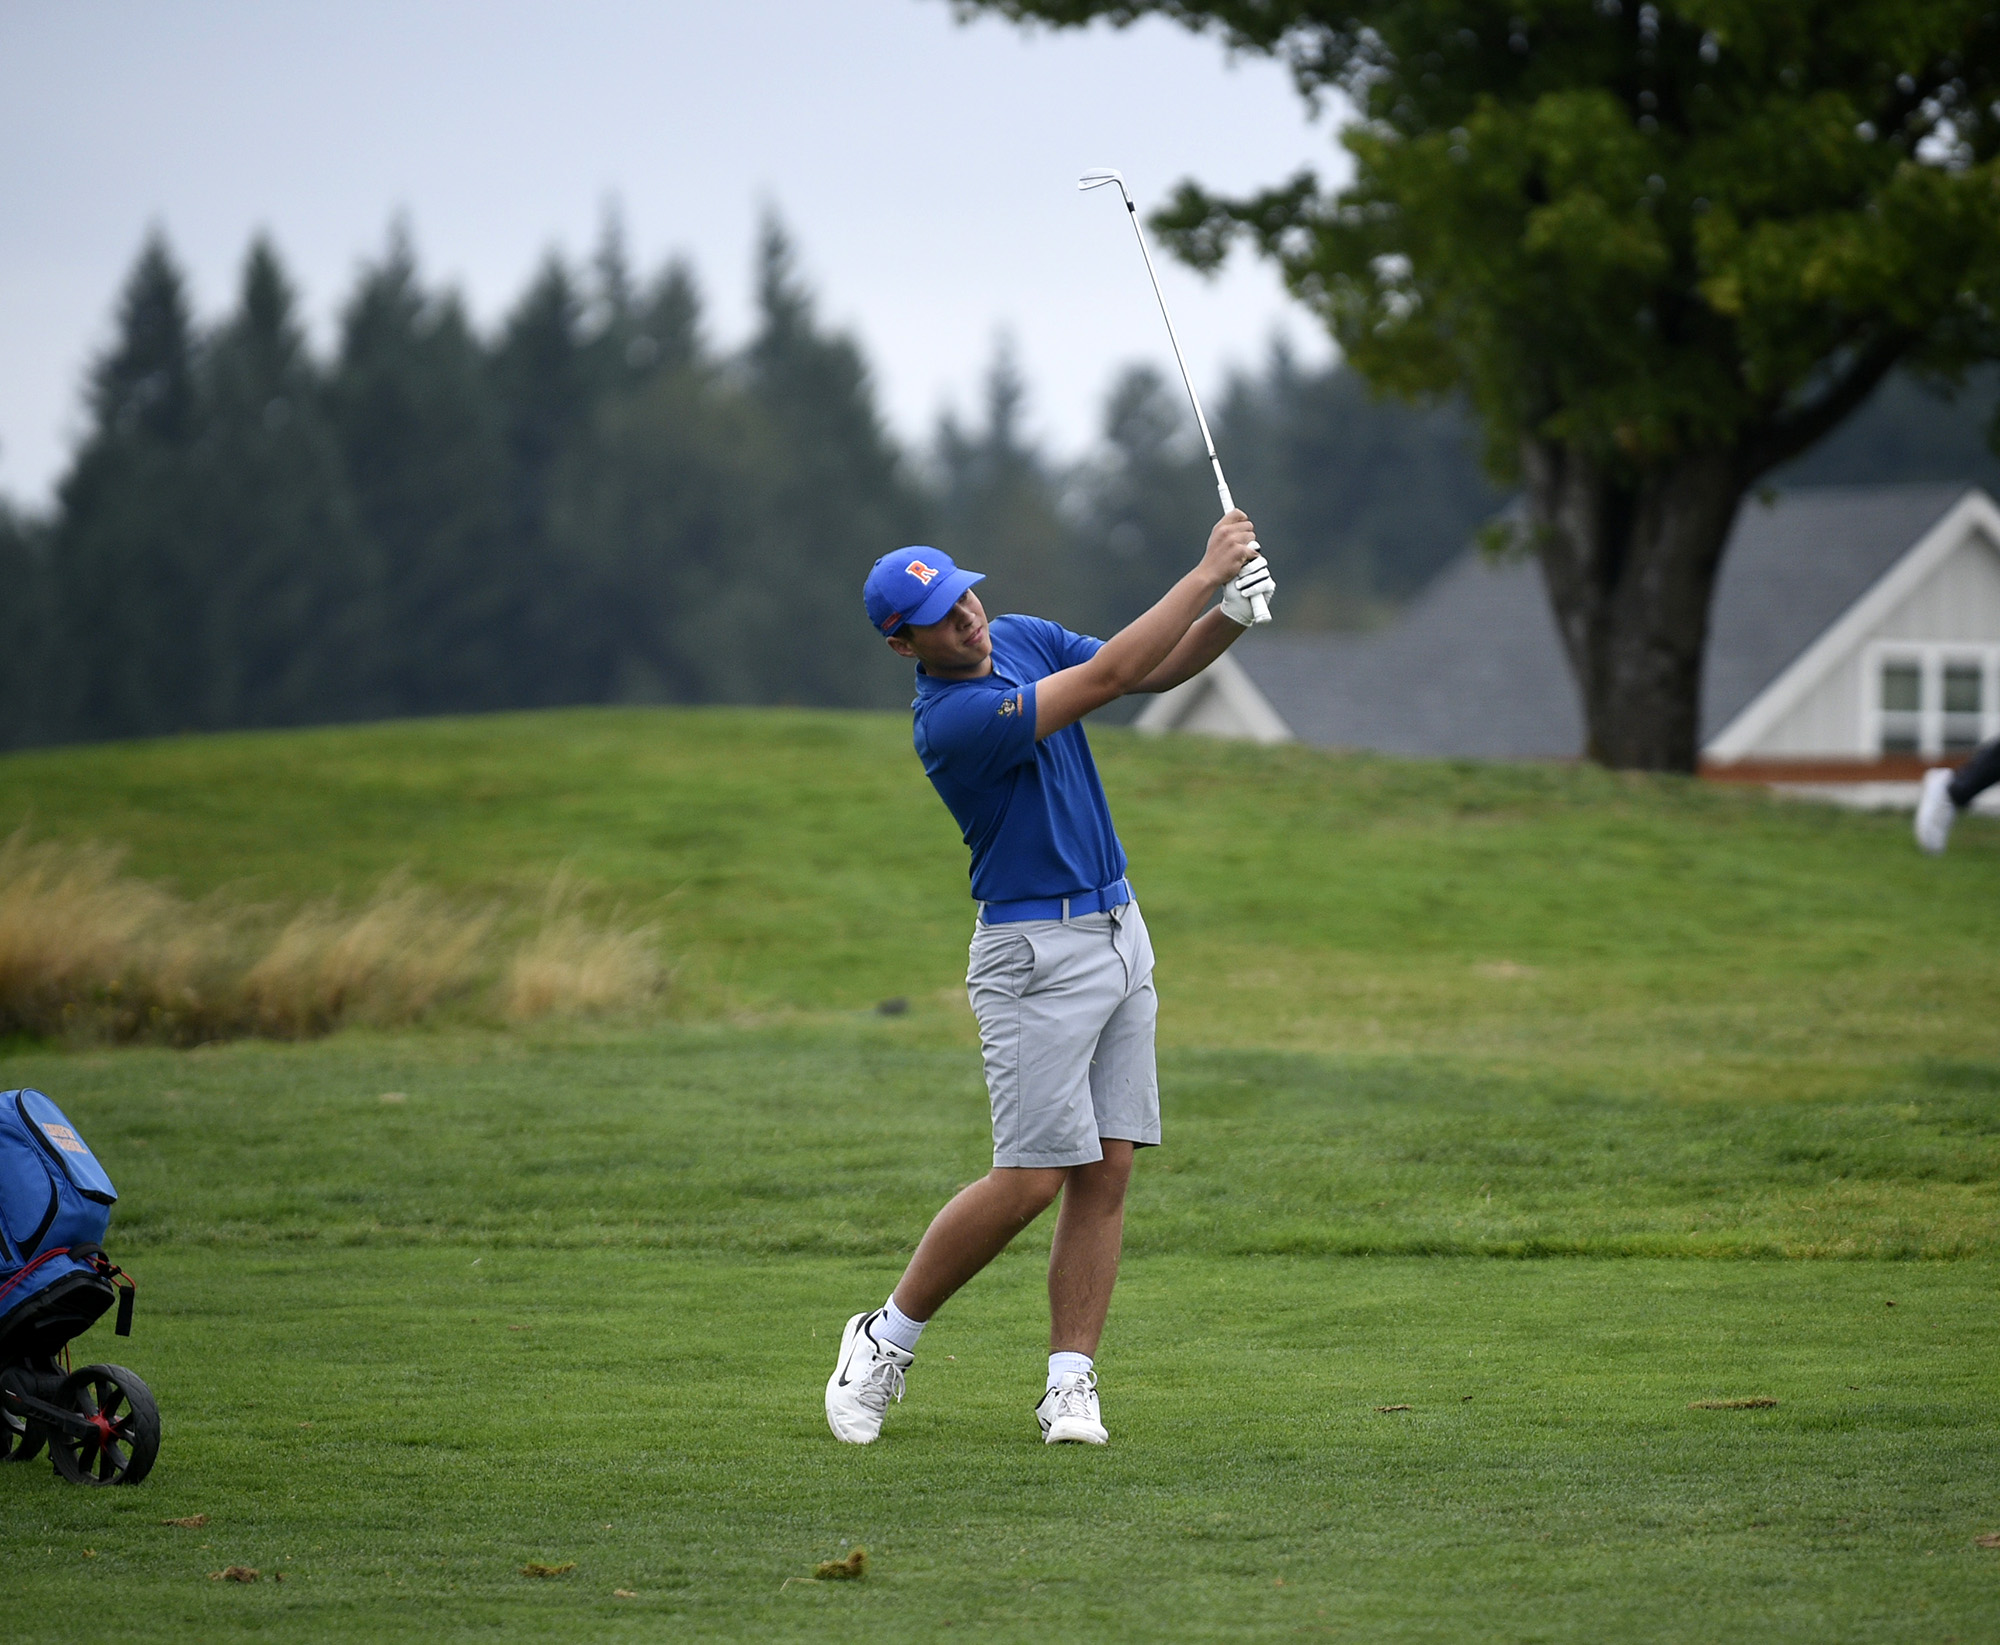 Ridgefield's Drew Krsul hits a shot from the fairway of the No. 5 hole at Tri-Mountain Golf Course during a match against Union on Monday, Aug. 28, 2023. Krsul was the medalist with a 45 as Ridgefield won 188-192.